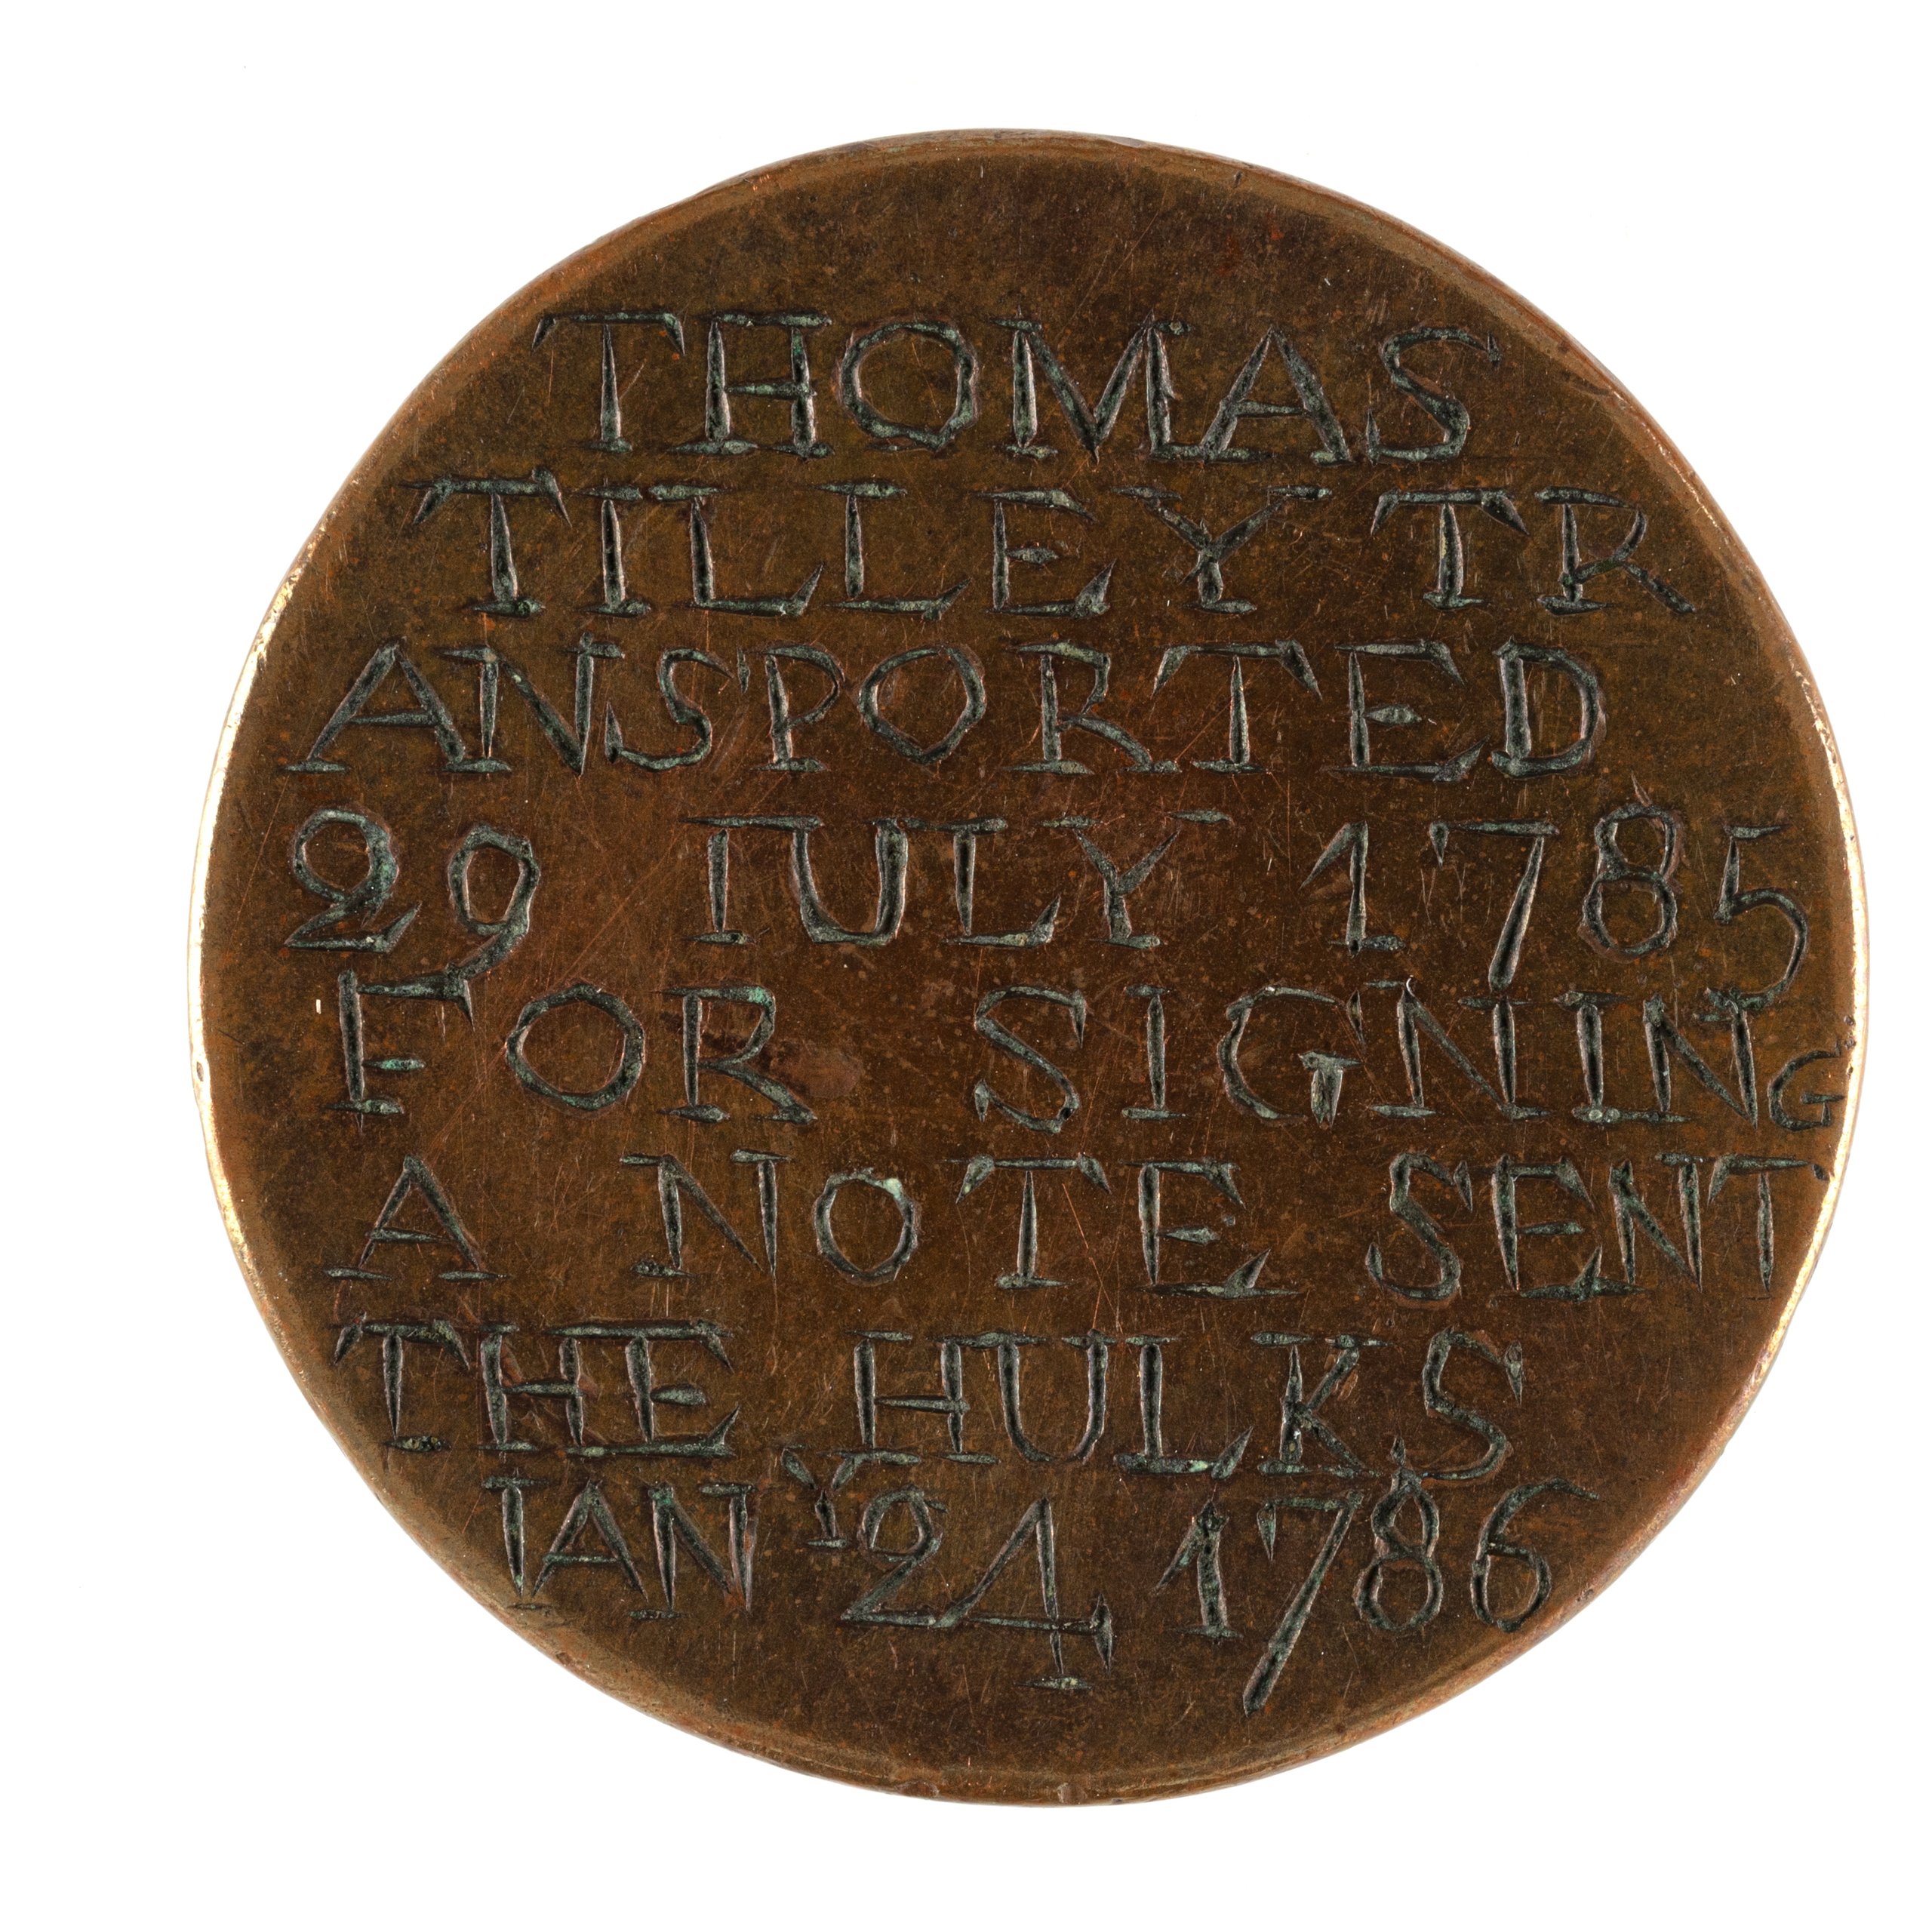 Convict love token engraved by Thomas Tilley